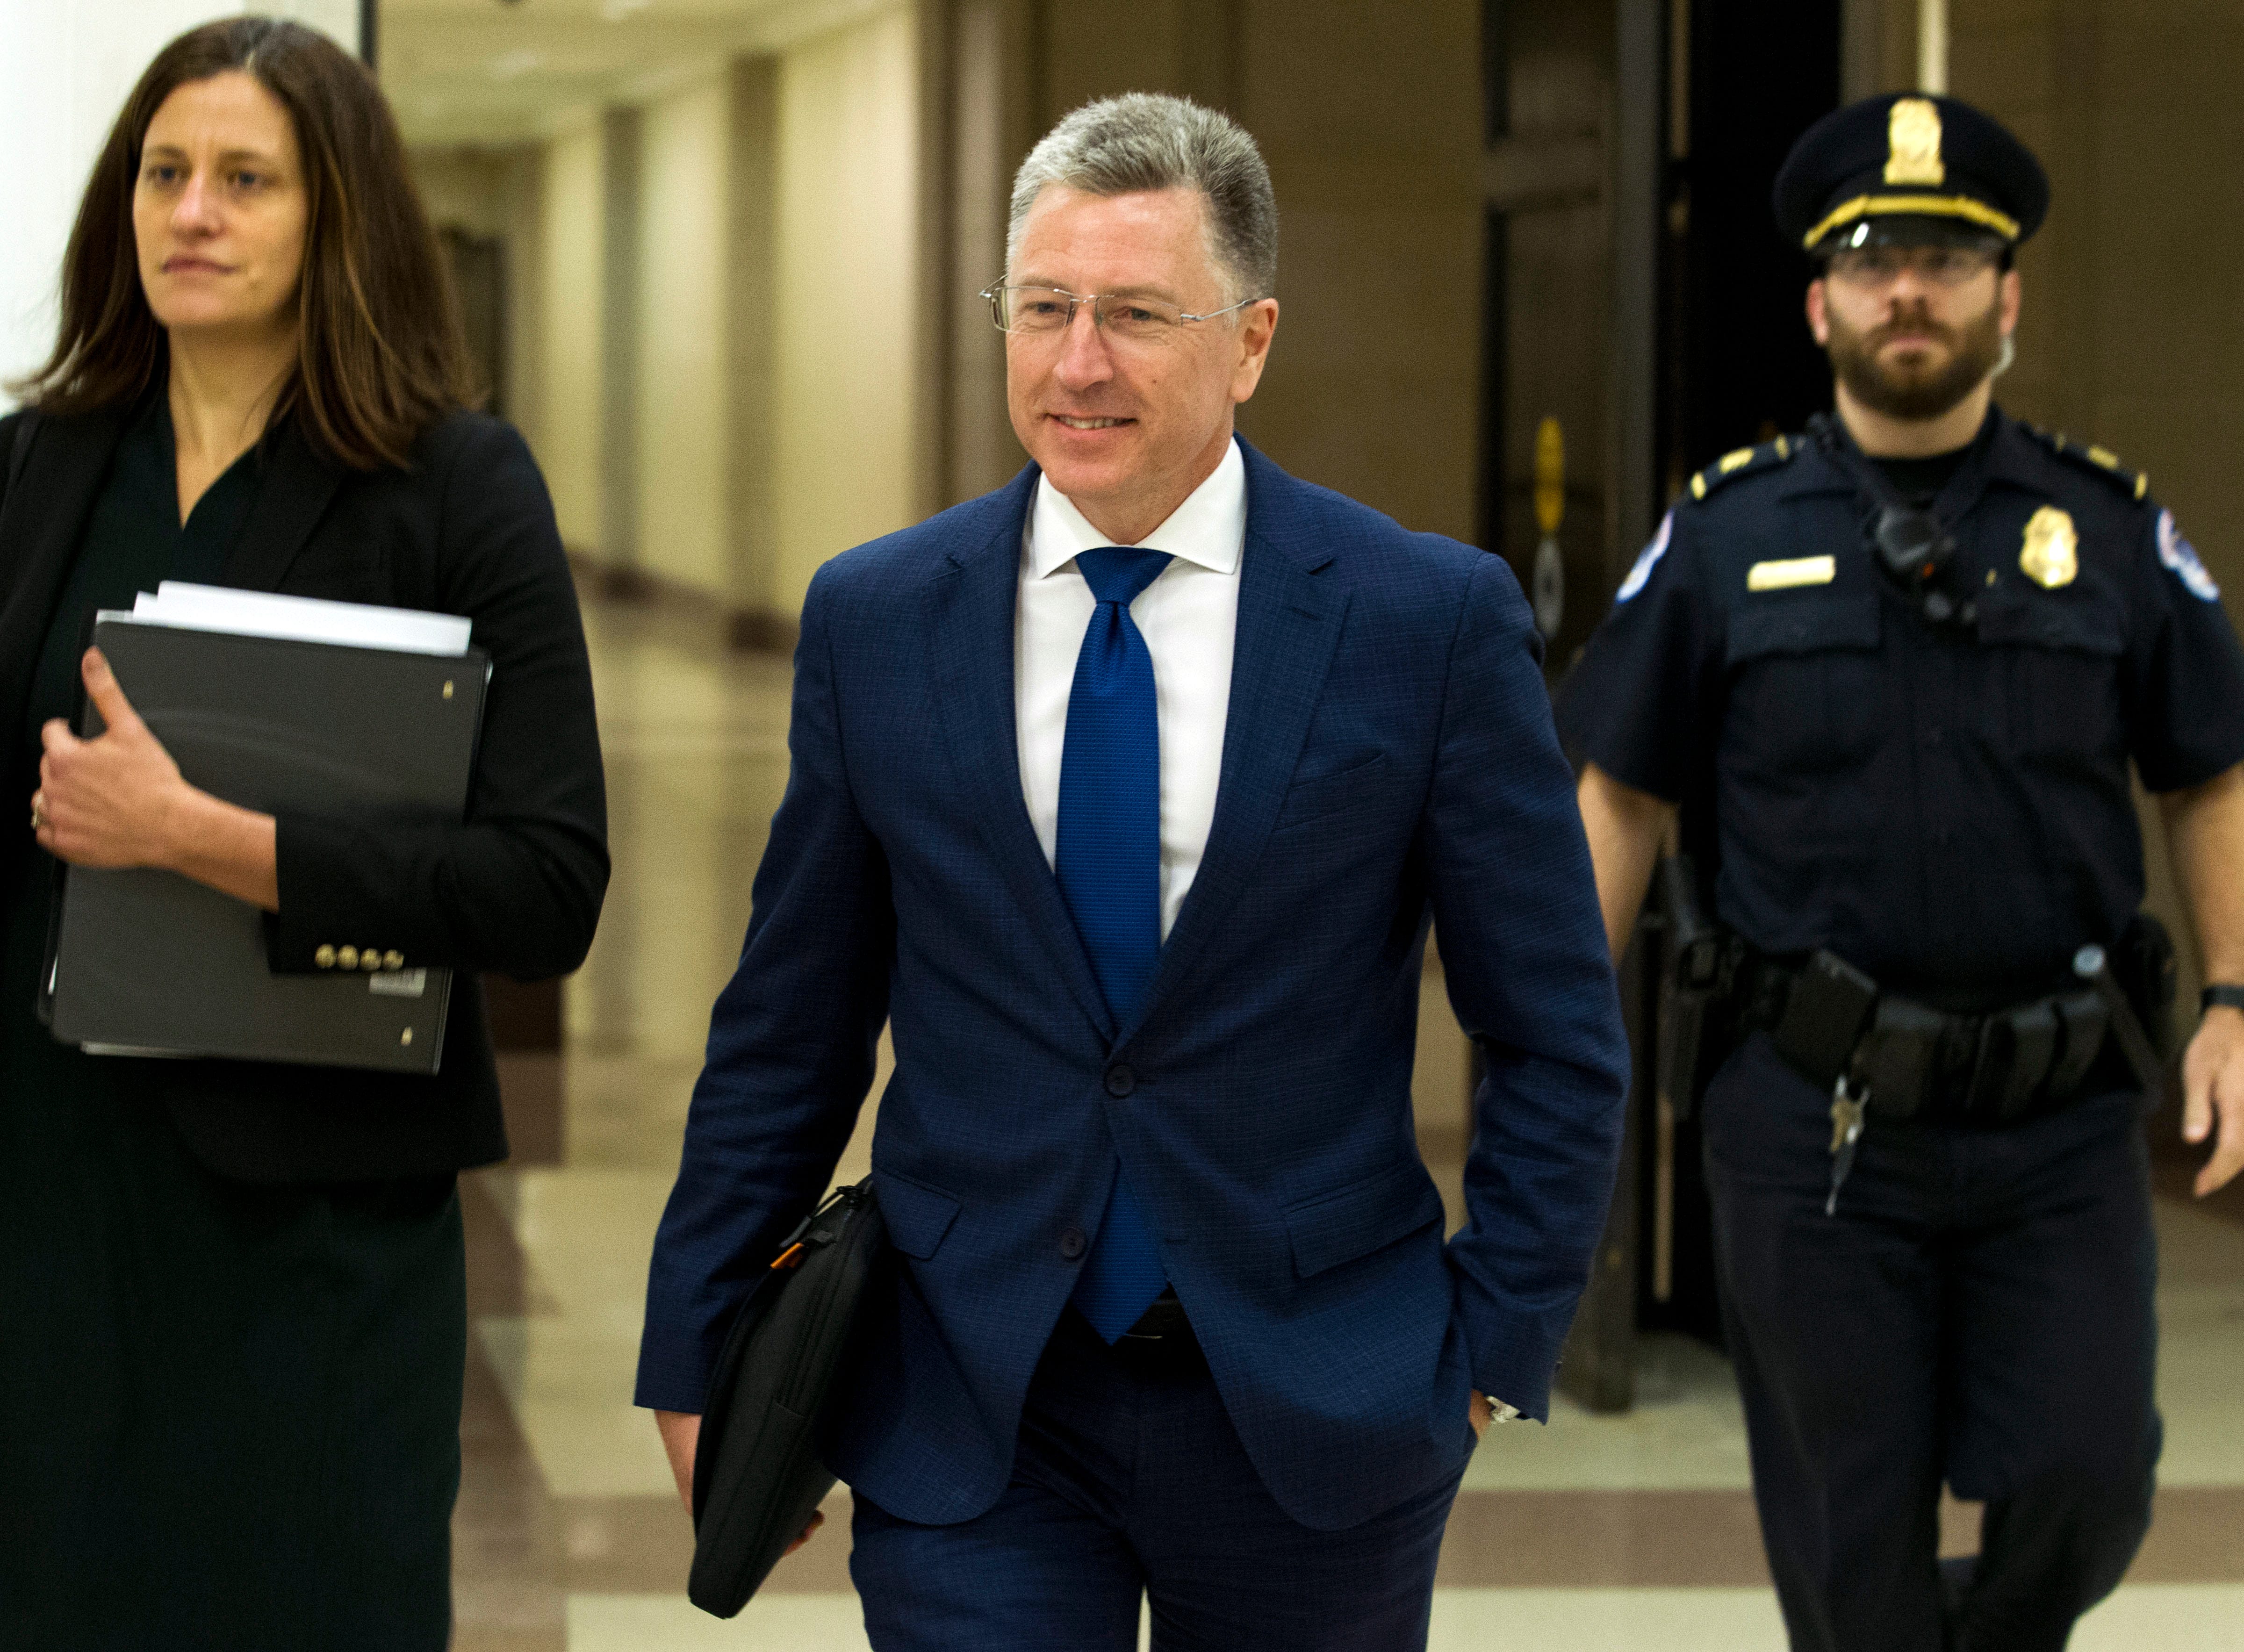 e1f6fe7a-c28d-4874-92d7-f2c365540e9b-AP_Trump_Impeachment_2 Key takeaways from newly released Volker and Sondland transcripts of impeachment testimony